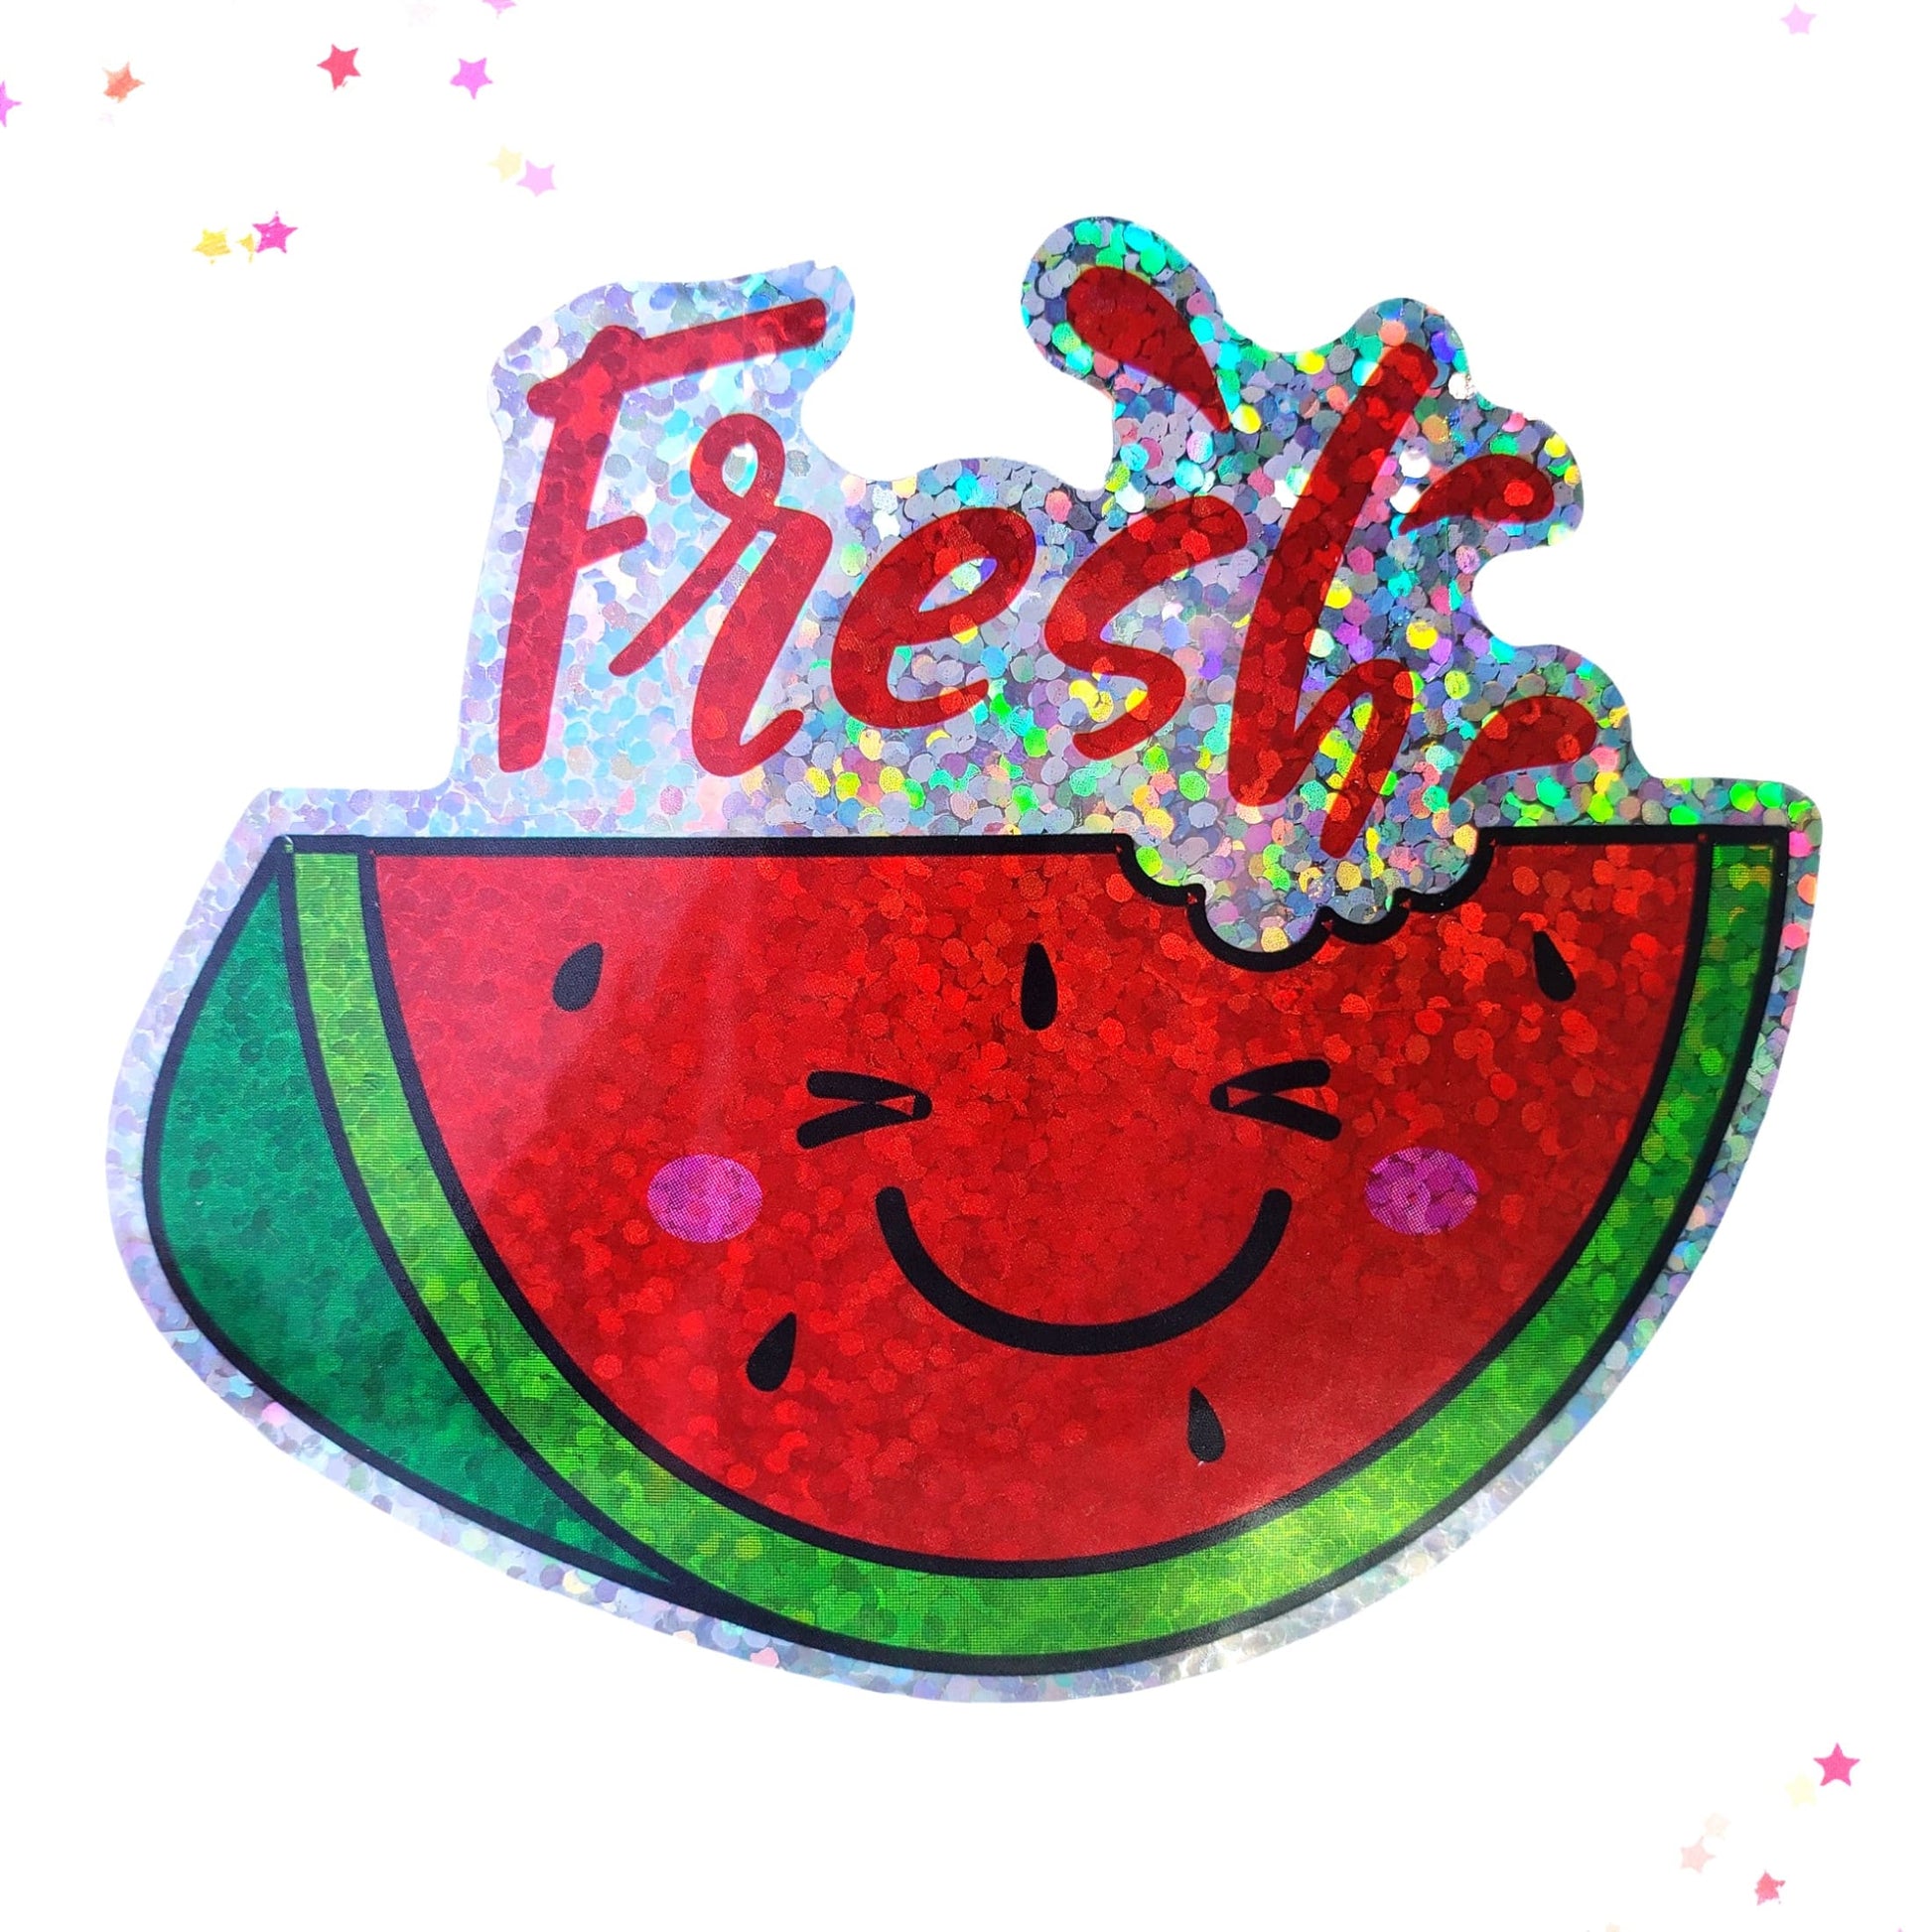 Premium Sticker - Sparkly Holographic Glitter Fresh Watermelon from Confetti Kitty, Only 2.00